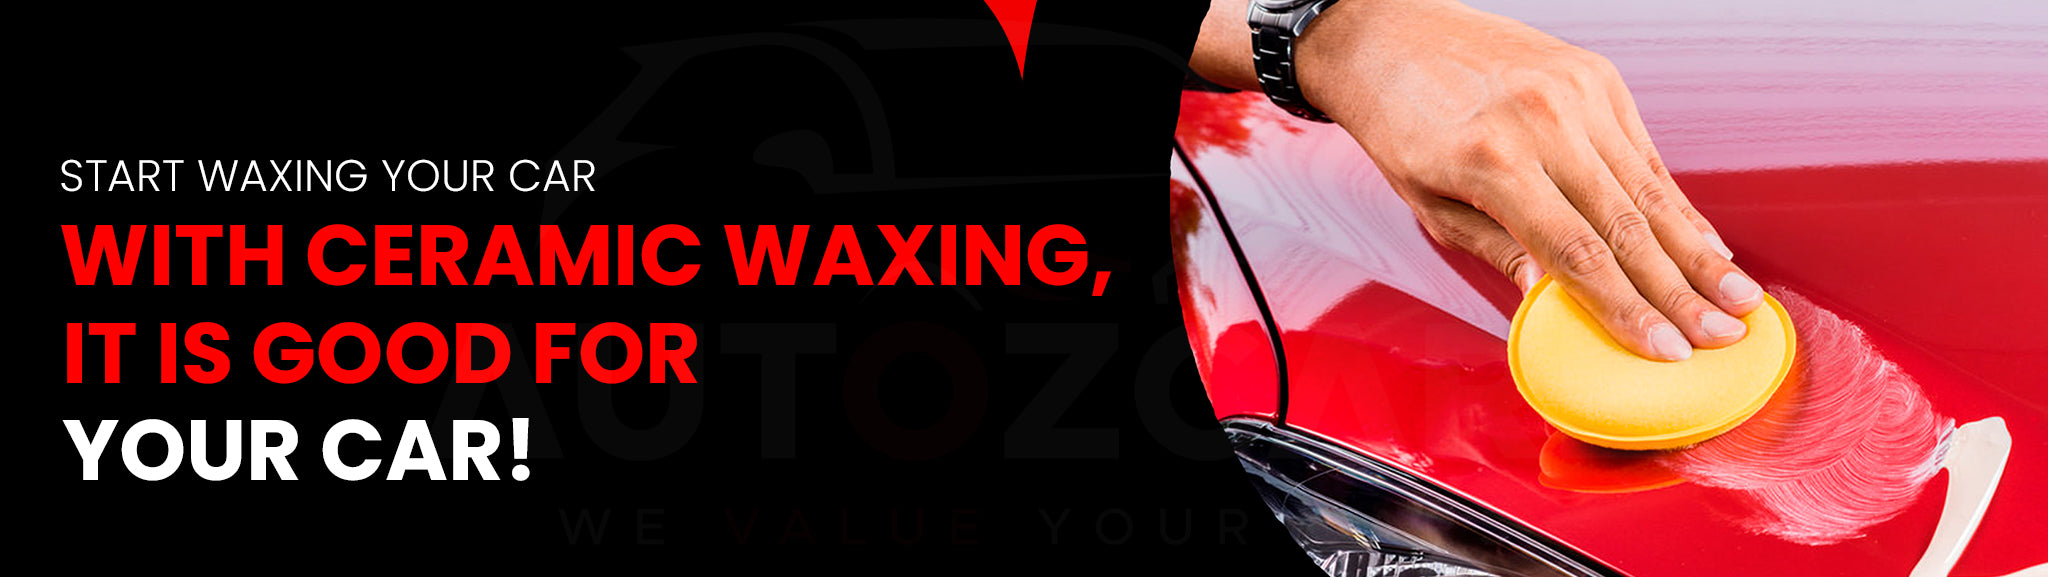 Start waxing your car with ceramic waxing, it is good for your car!